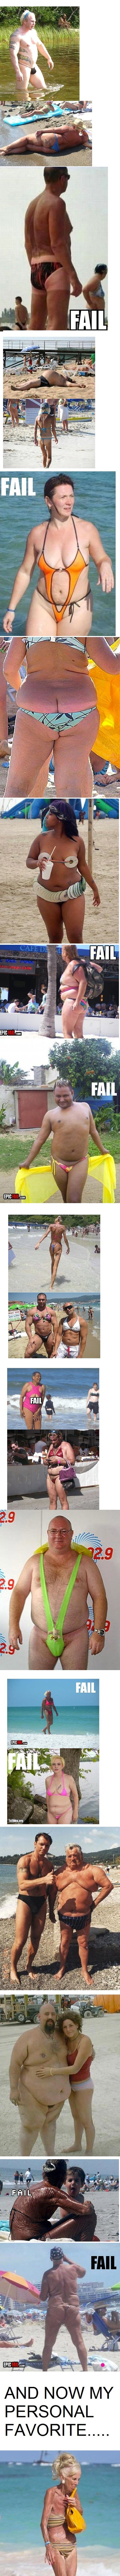 Walmartians at the Beach. Sorry guys.. This is the most disturbing i've seen all day.